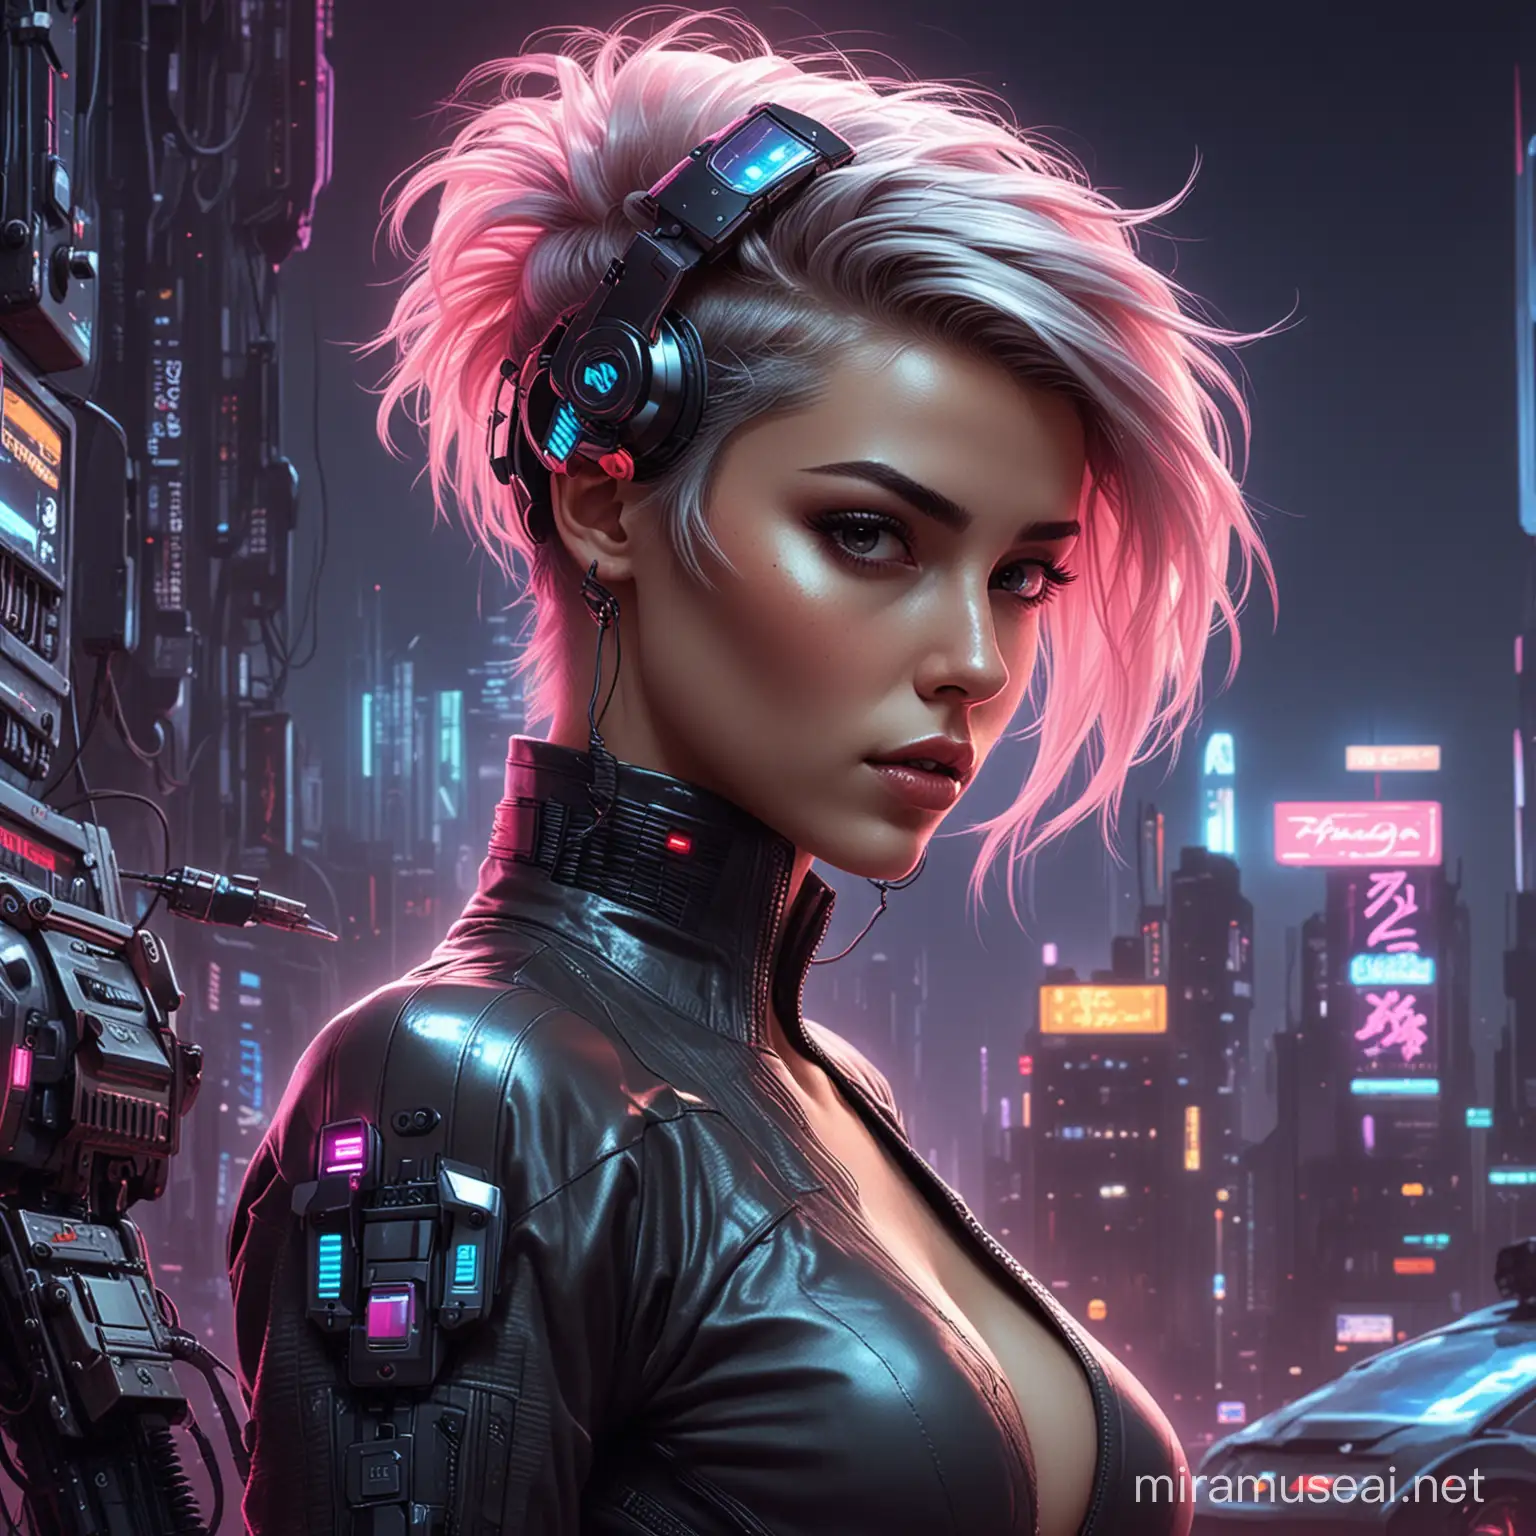 Futuristic Seductive Woman with Cyber Gadgets in Retrowave Interior